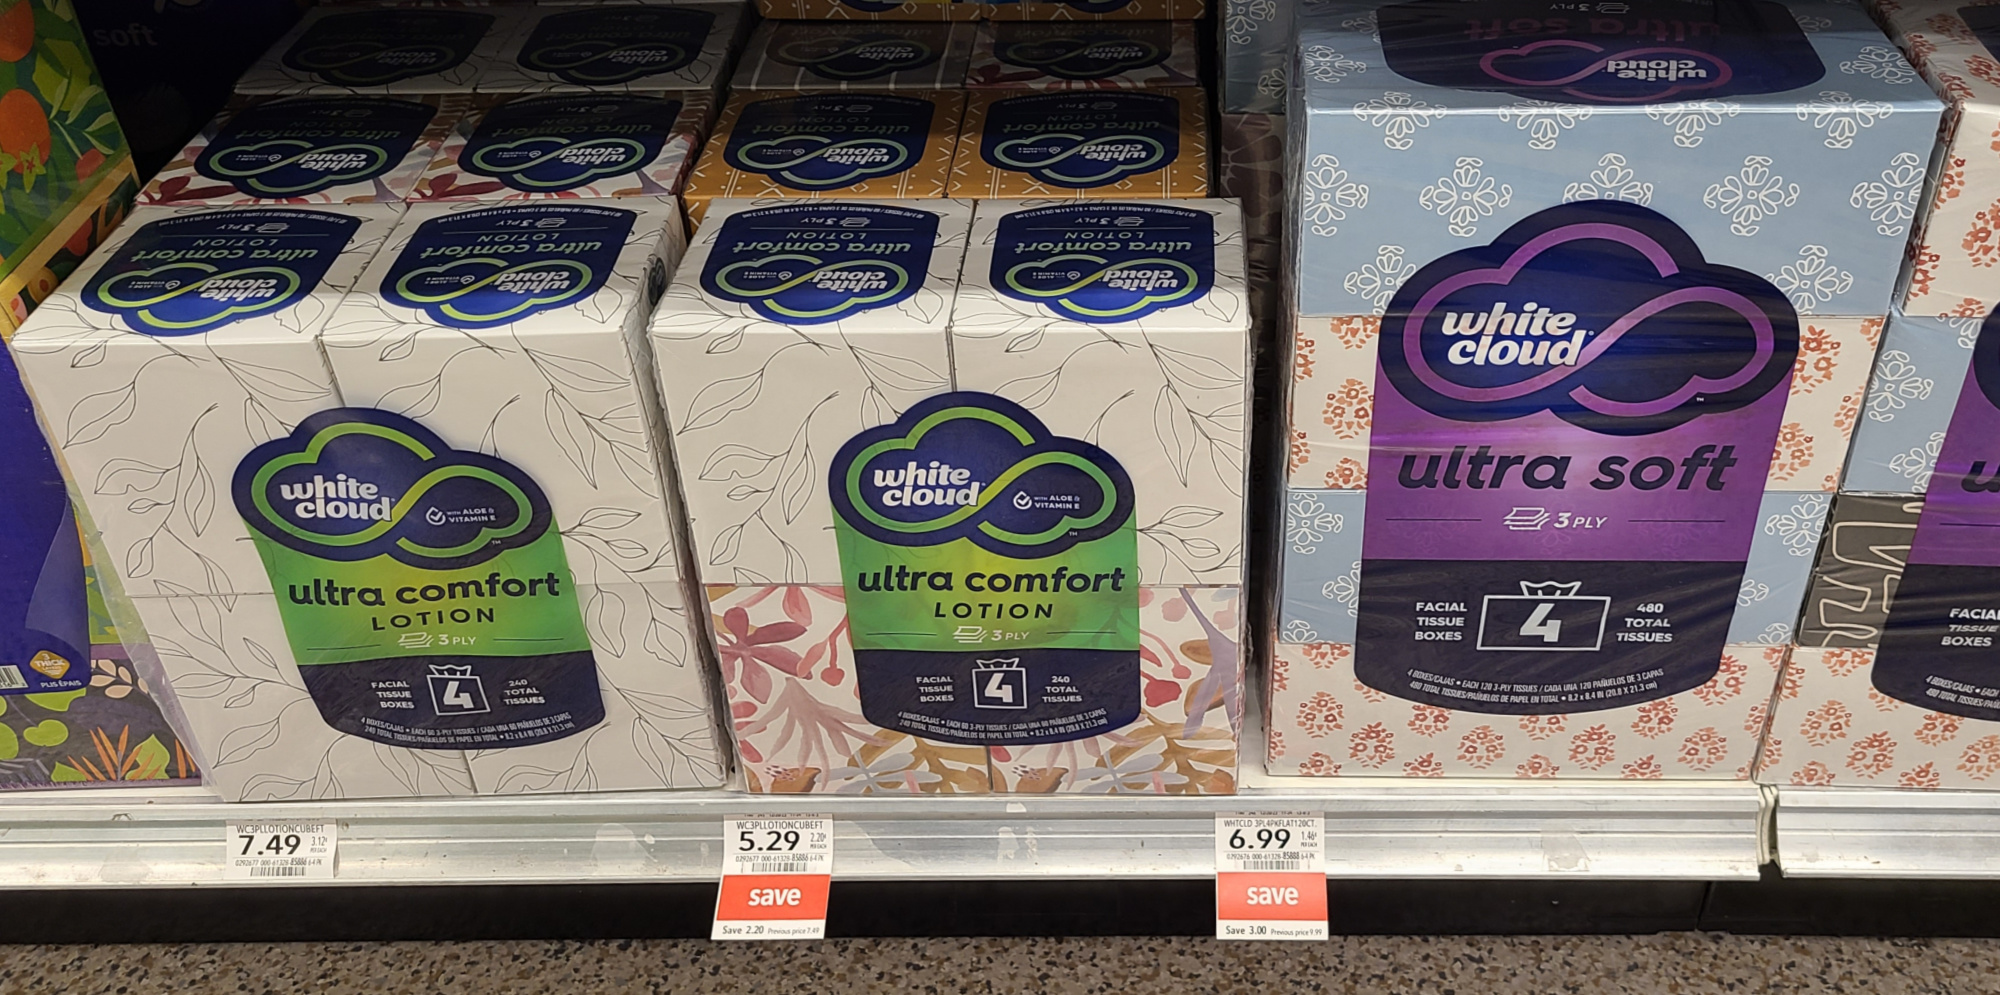 10-Count Packages Of Ball Aluminum Cups Just $2 At Publix - iHeartPublix